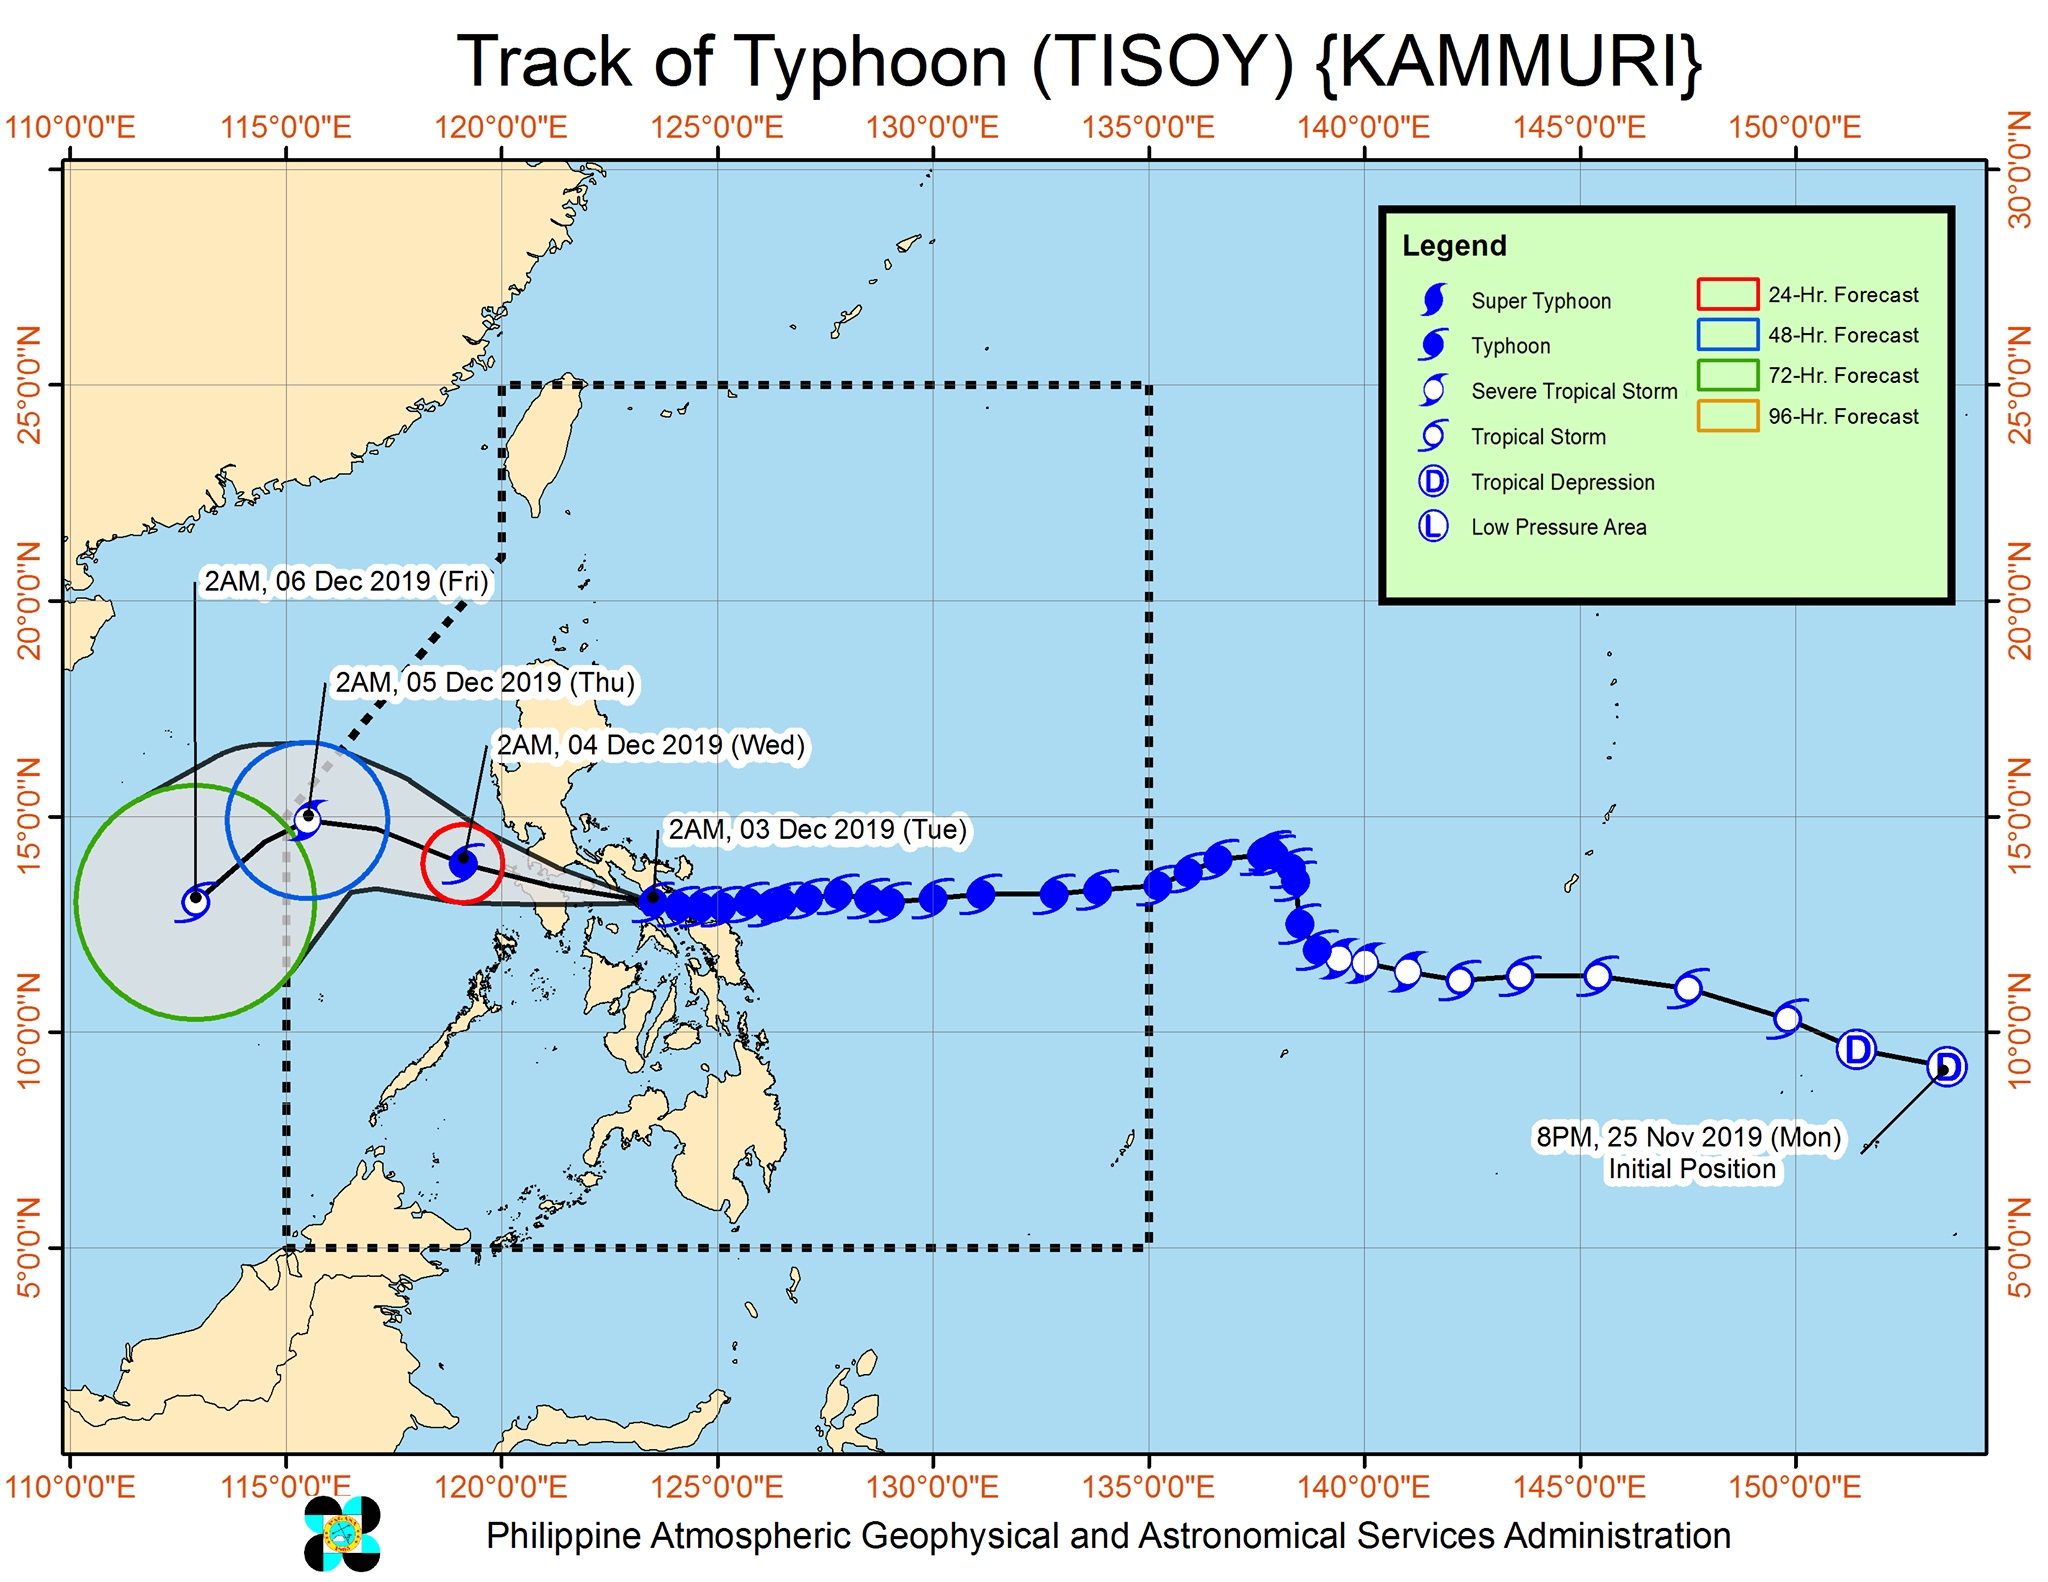 Forecast track of Typhoon Tisoy (Kammuri) as of December 3, 2019, 5 am. Image from PAGASA 